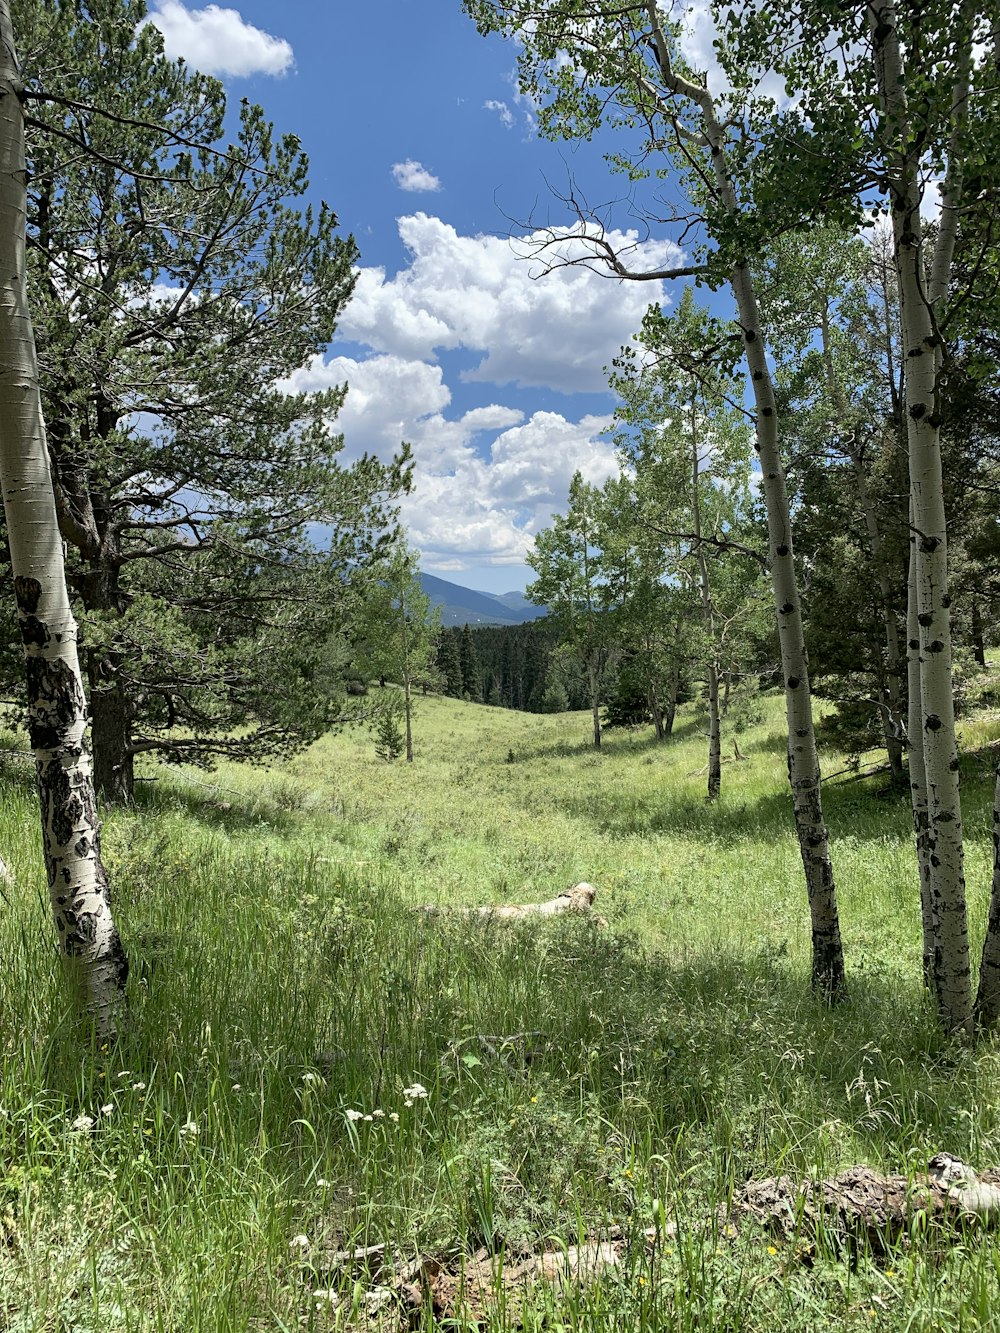 a grassy field surrounded by trees and mountains